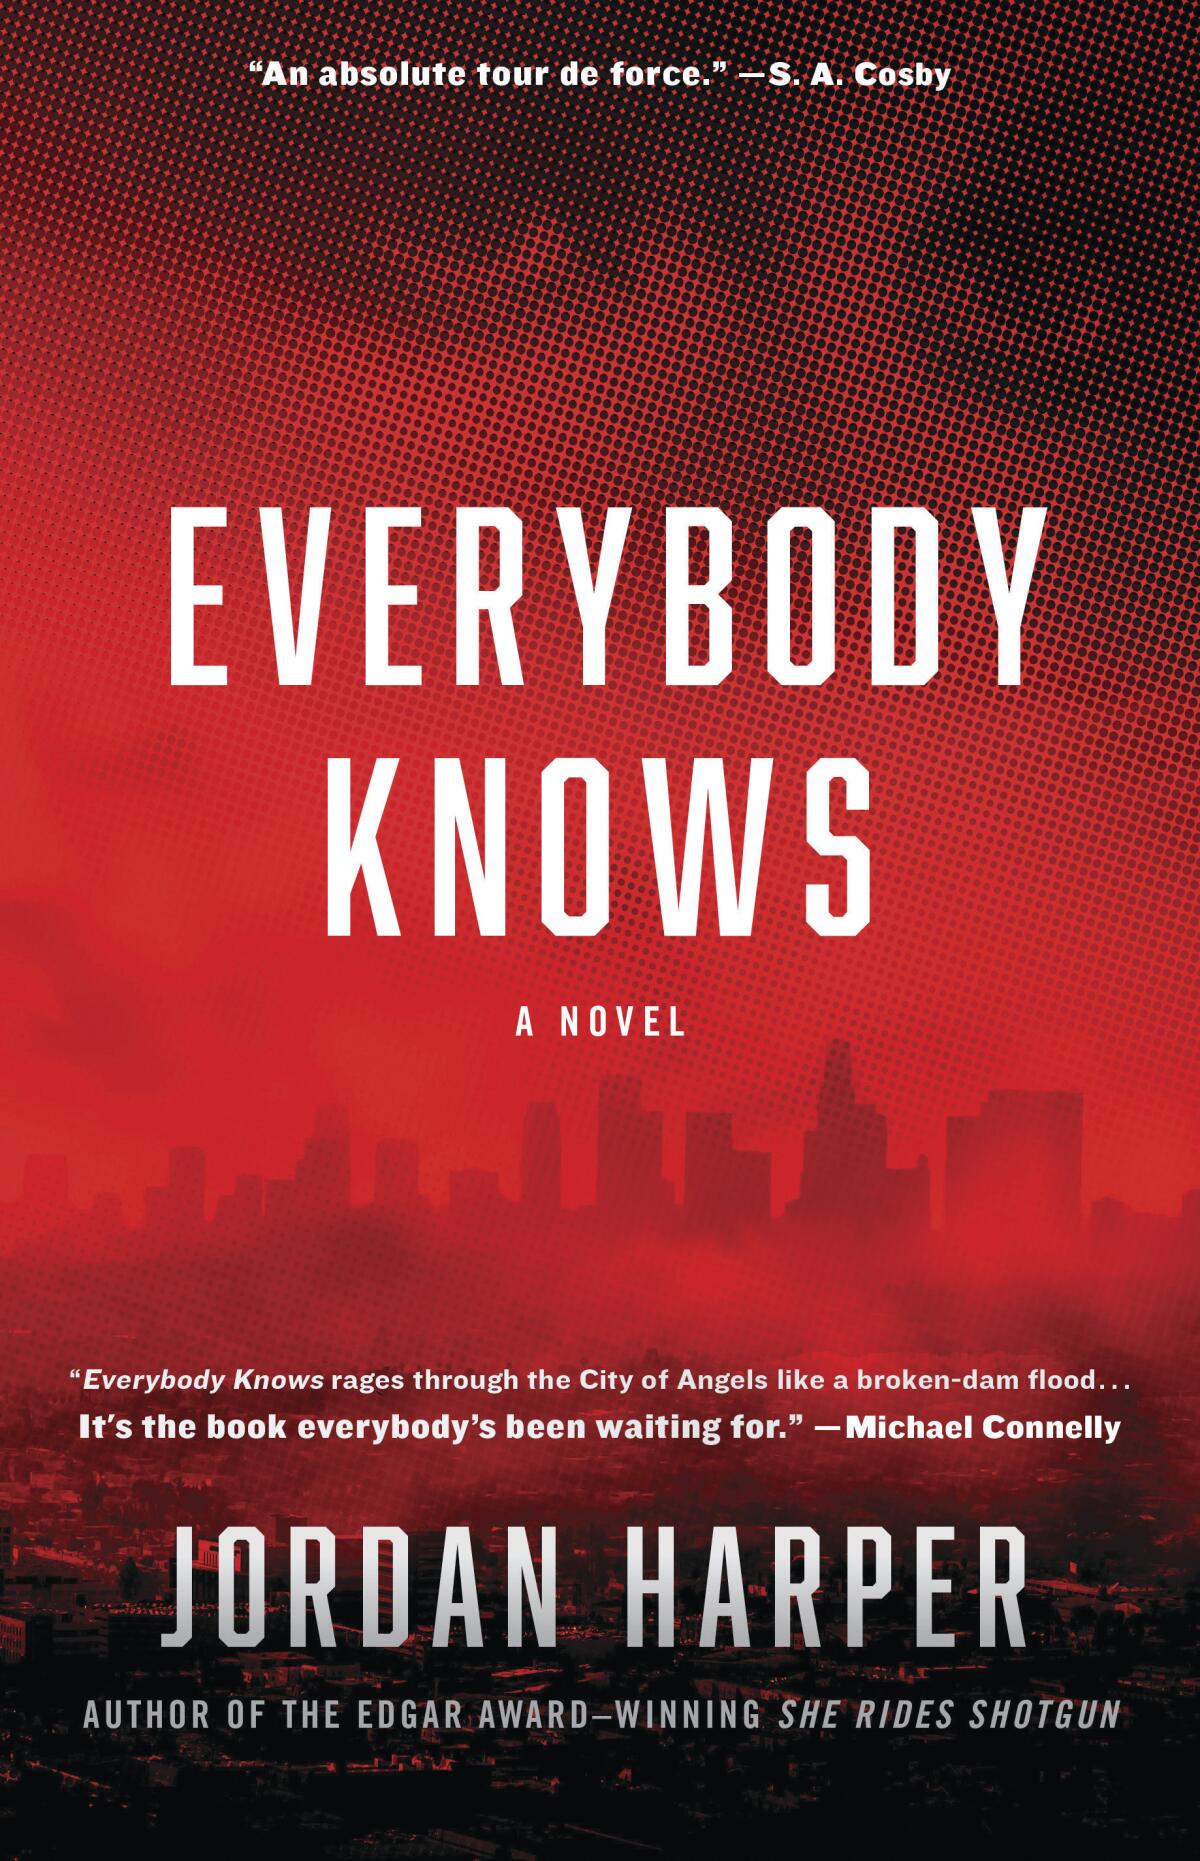 The cover of "Everybody Knows" by Jordan Harper